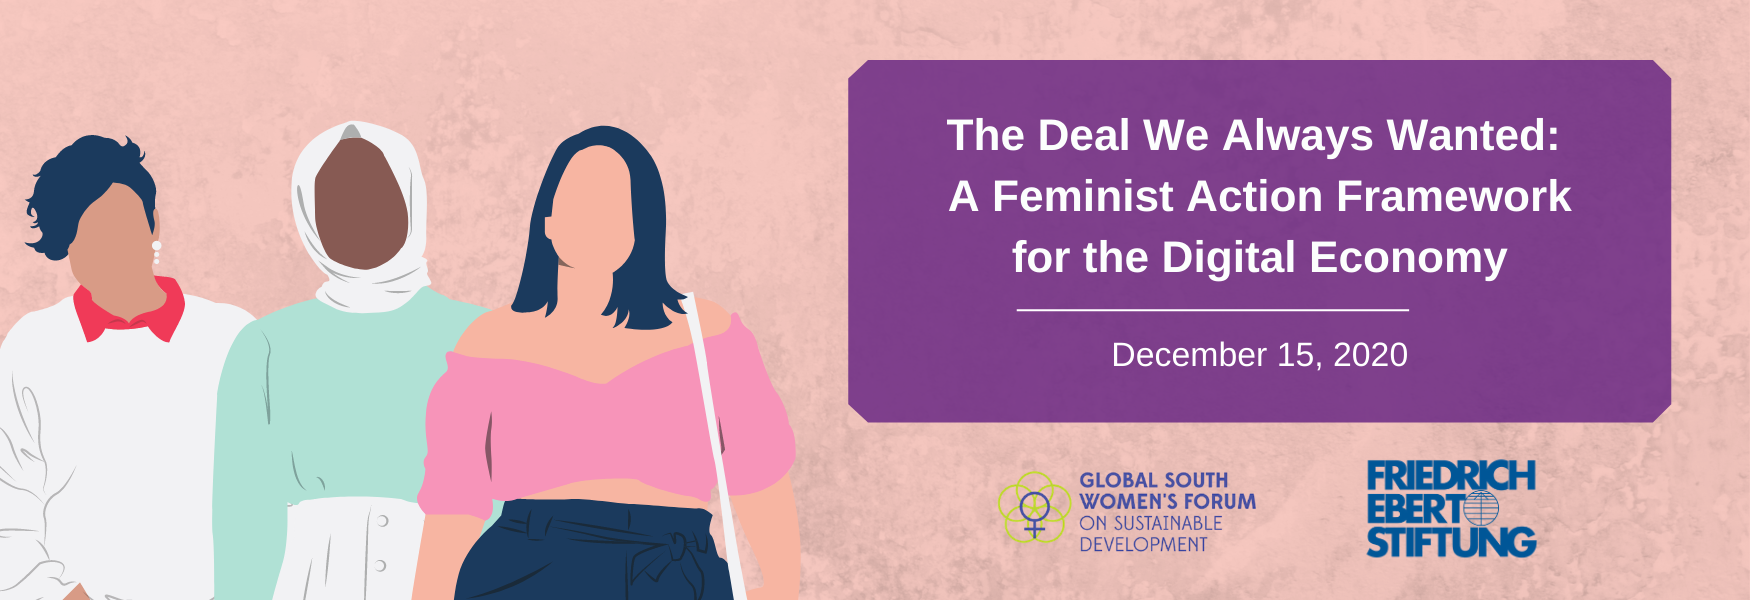 The Deal We Always Wanted: A Feminist Action Framework for the Digital Economy